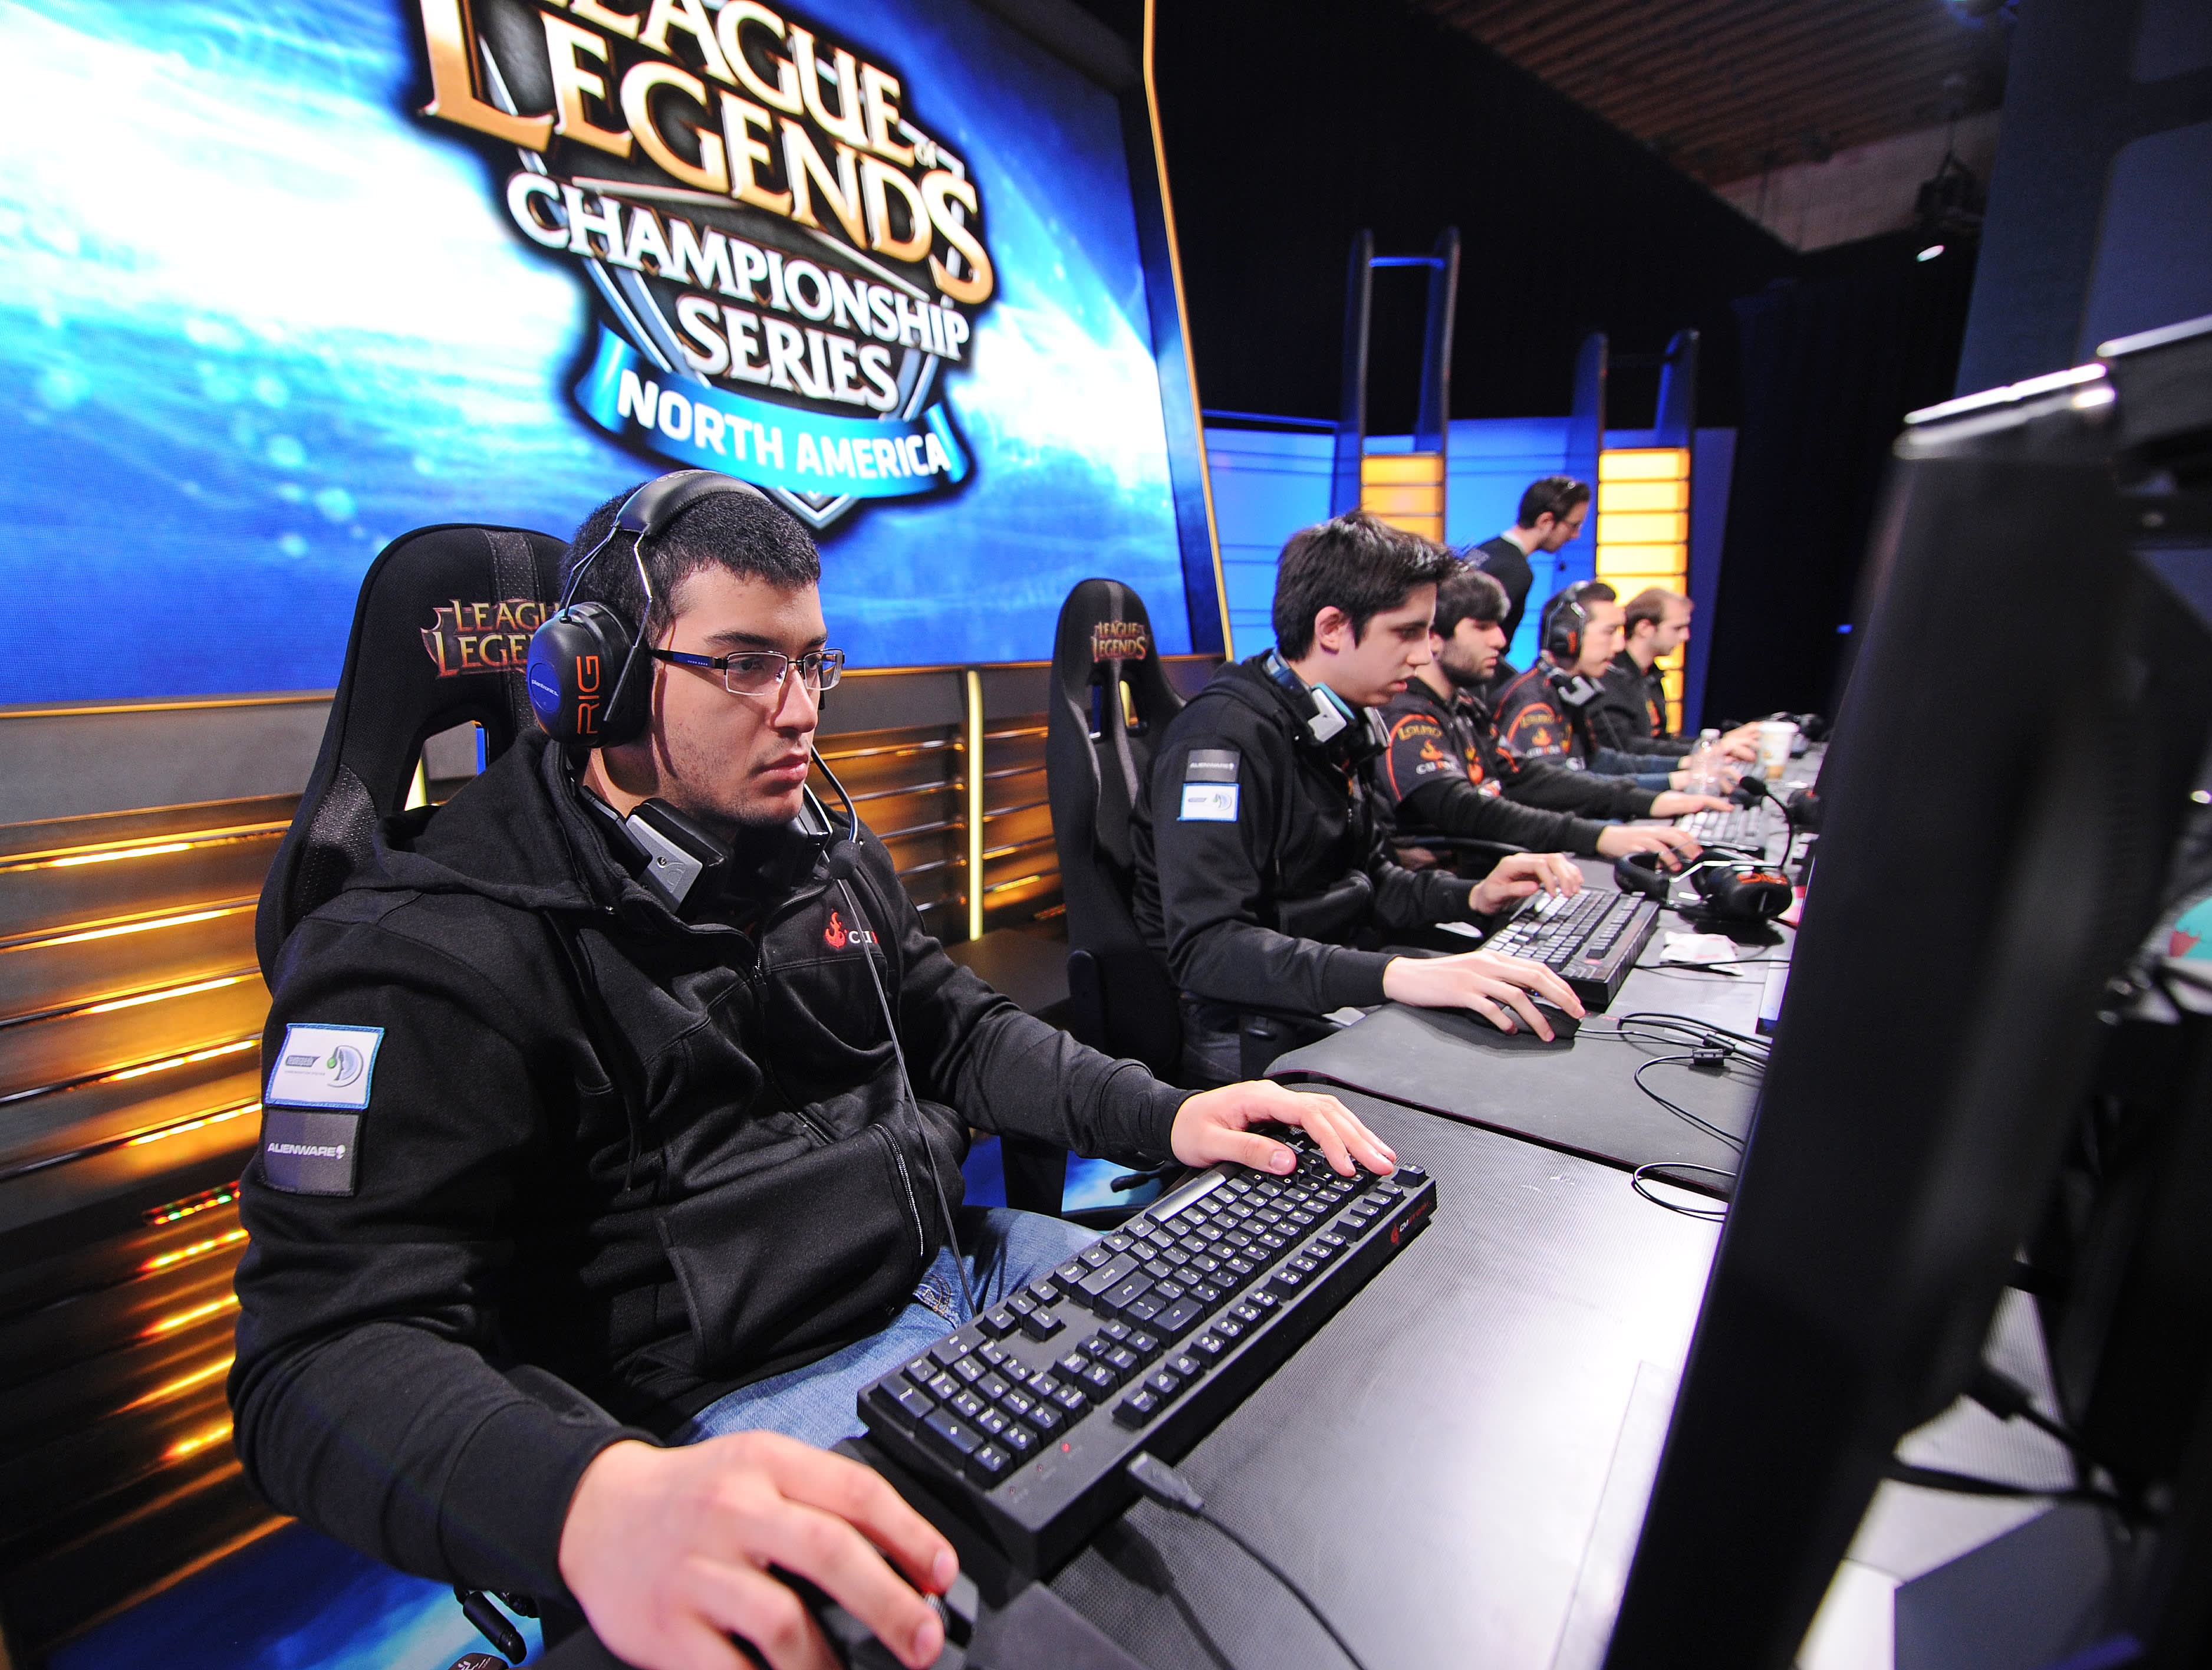 League of Legends may be tops in esports